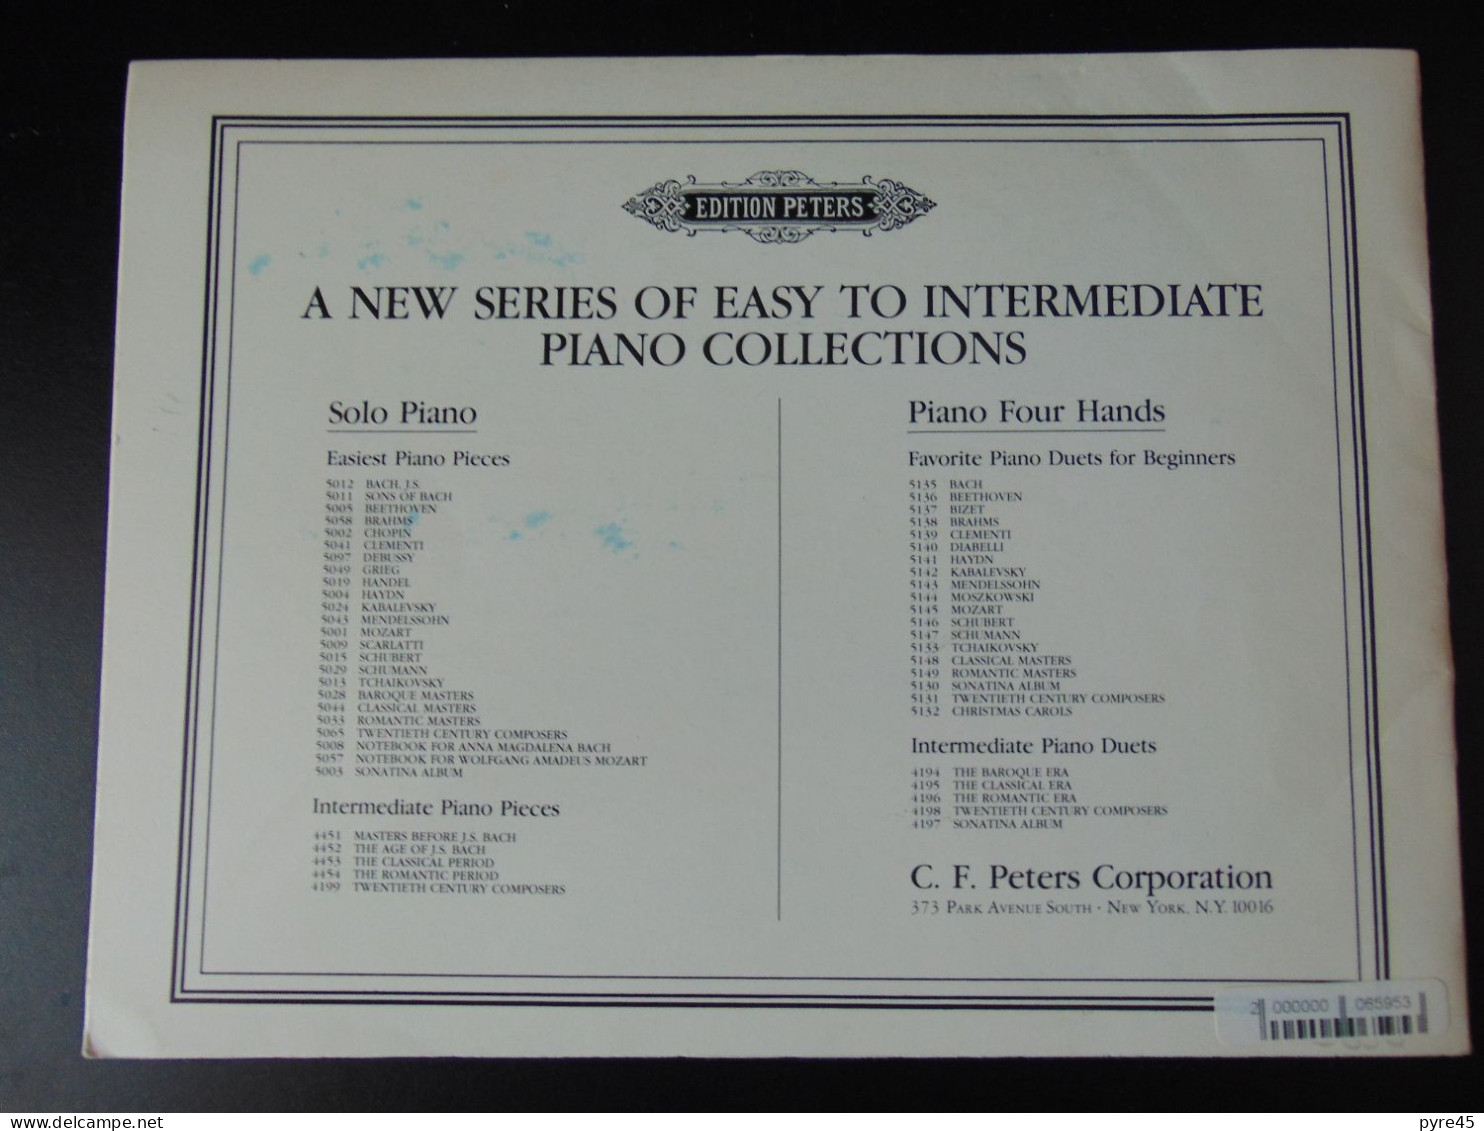 PARTITION BIZET FAVORITE PIANO DUETS FOR BEGINNERS CHILDREN S GAMES OP. 22